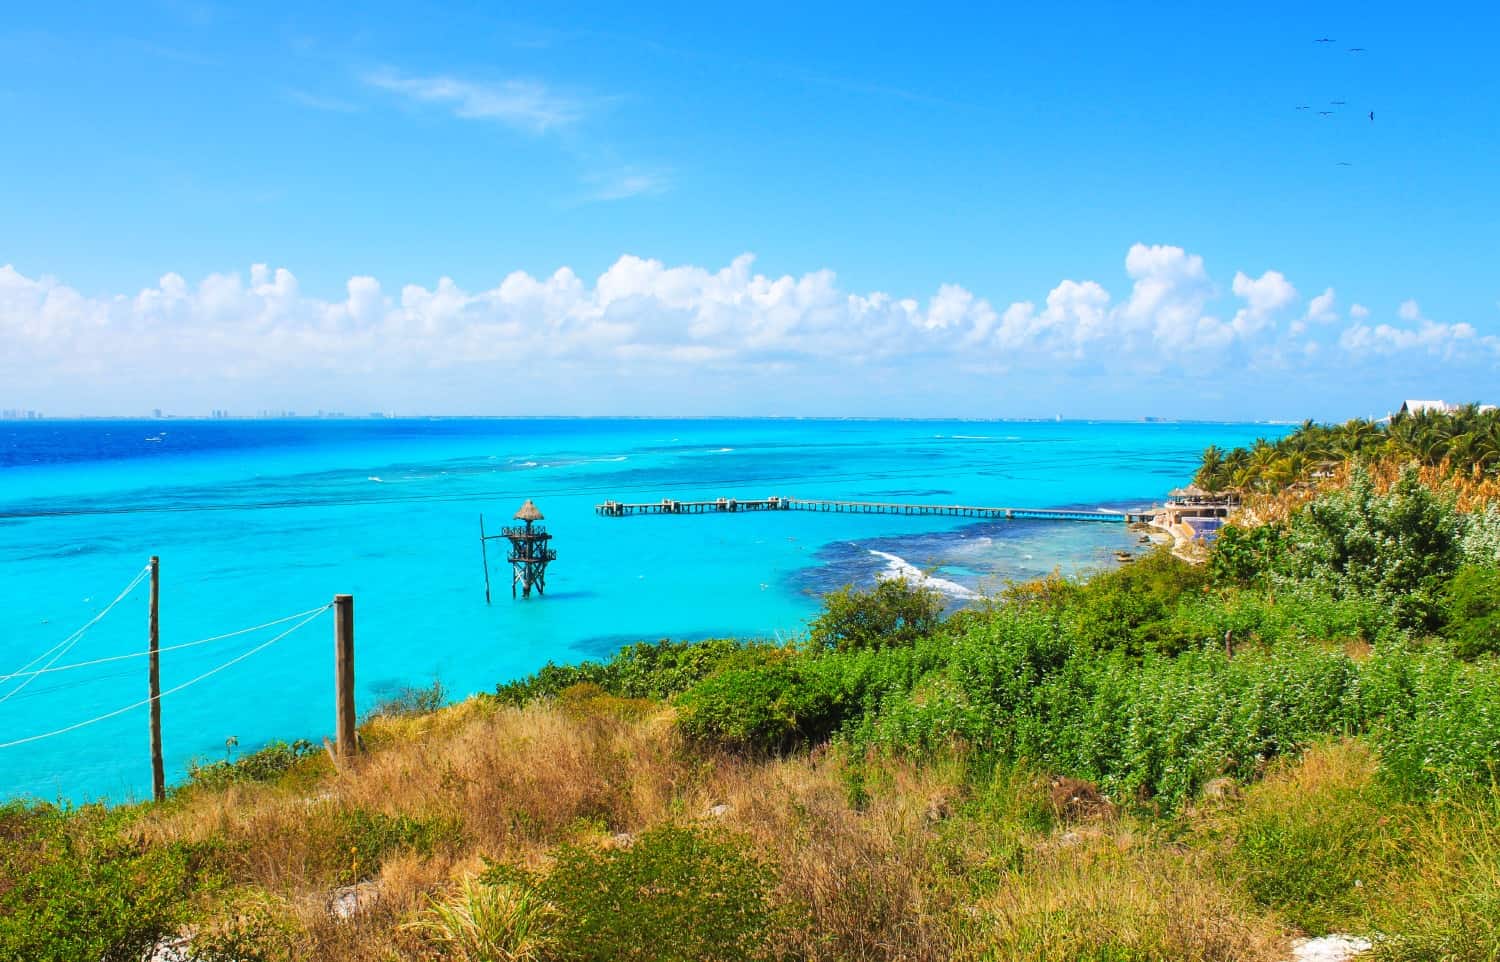 What Are the Best Beaches in Isla Mujeres? - Next Vacay